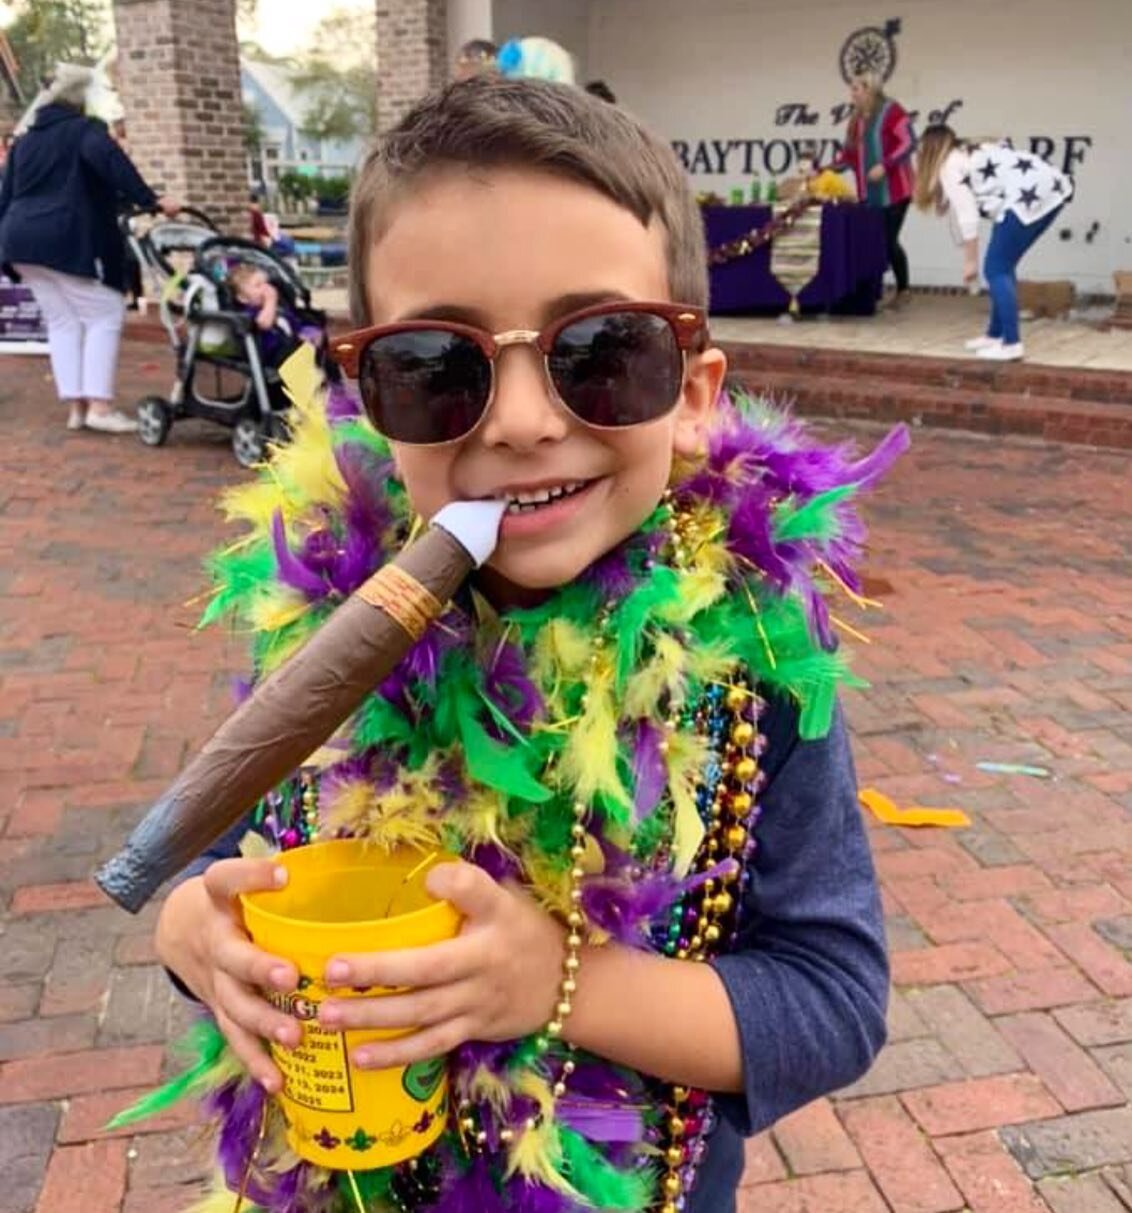 Anyone else ready for #MardiGras? We know this dude is!

There are TONS of great events happening this weekend &mdash; you can find out FULL events list through the link in our bio 💫
.
Find us on Saturday judging the @hwvdestin Parade!

PS - don&rsq